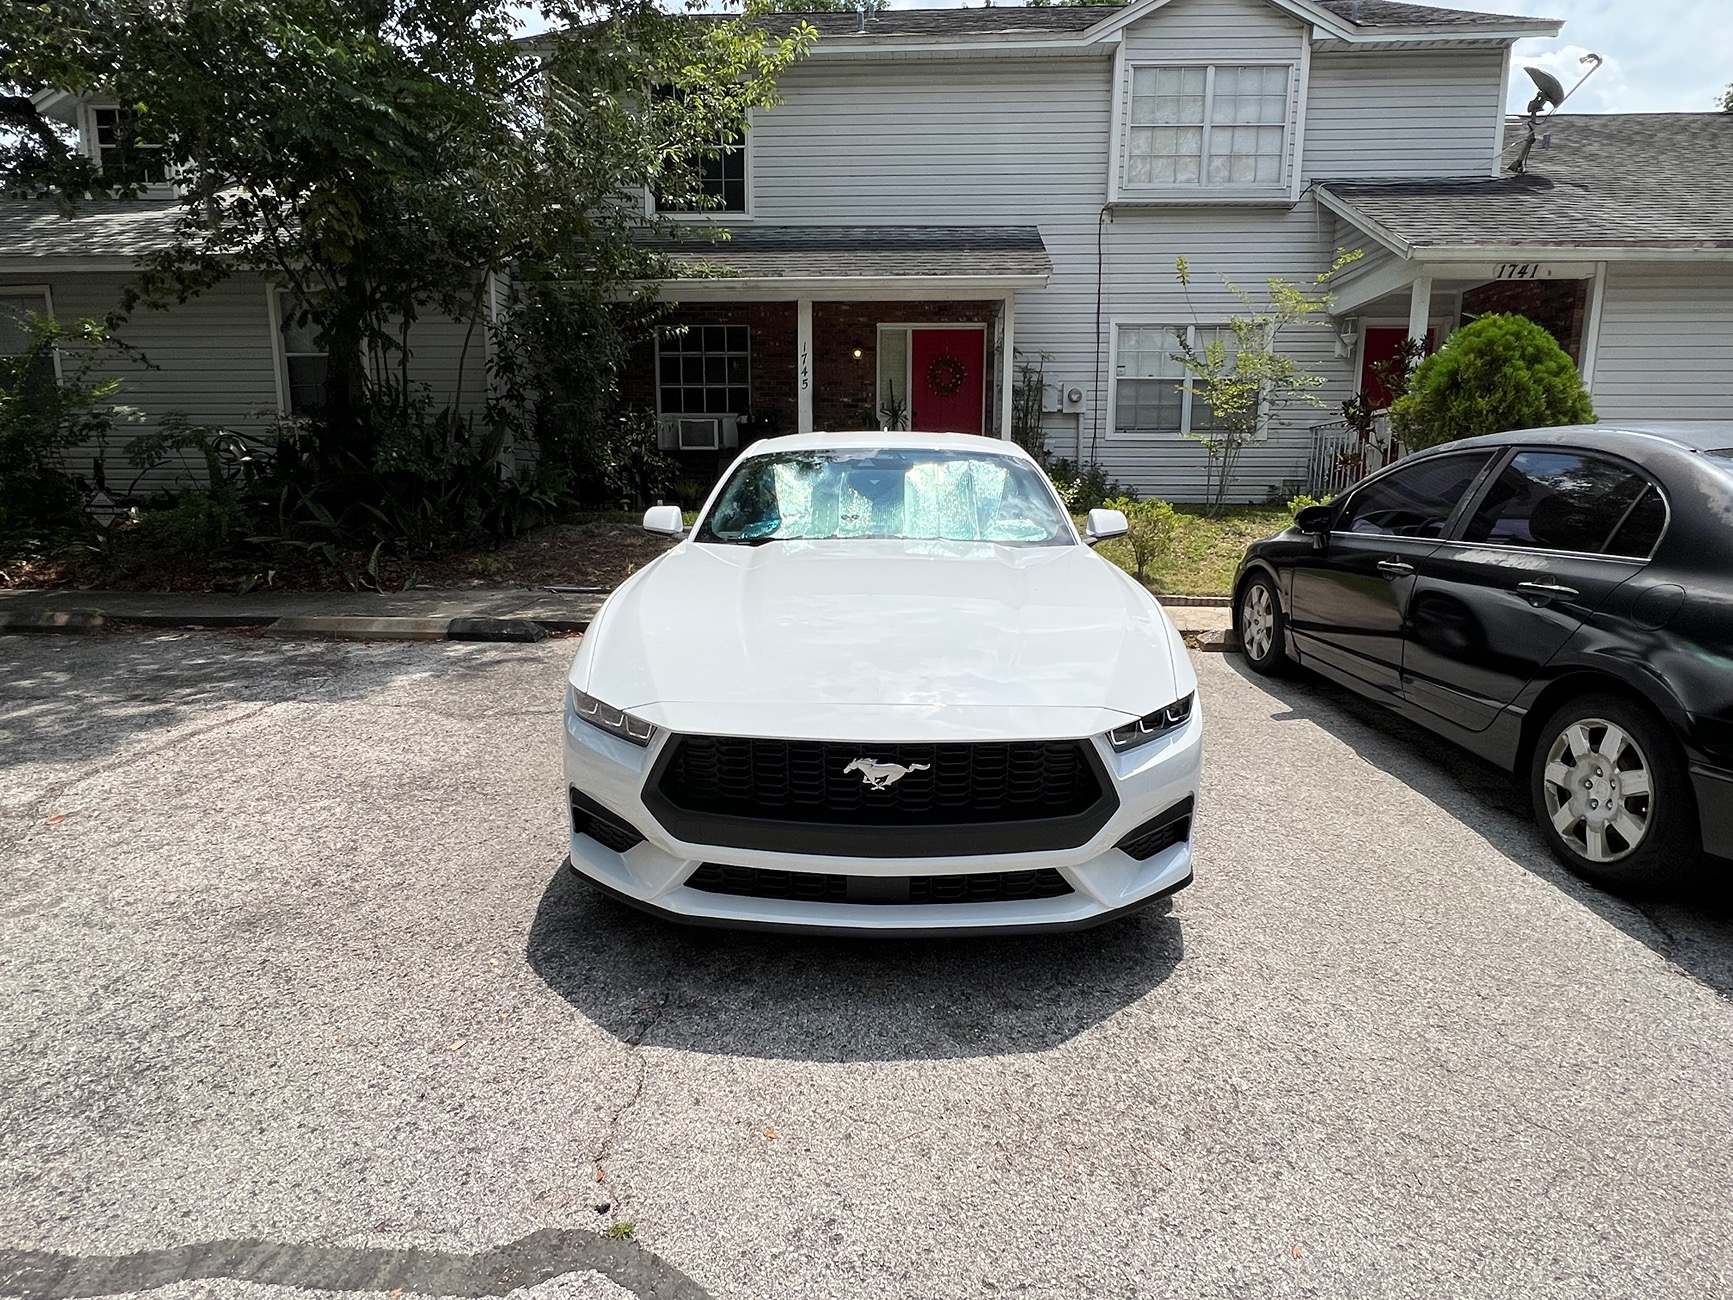 S650 Mustang 1 year further and still bad panels IMG_5404